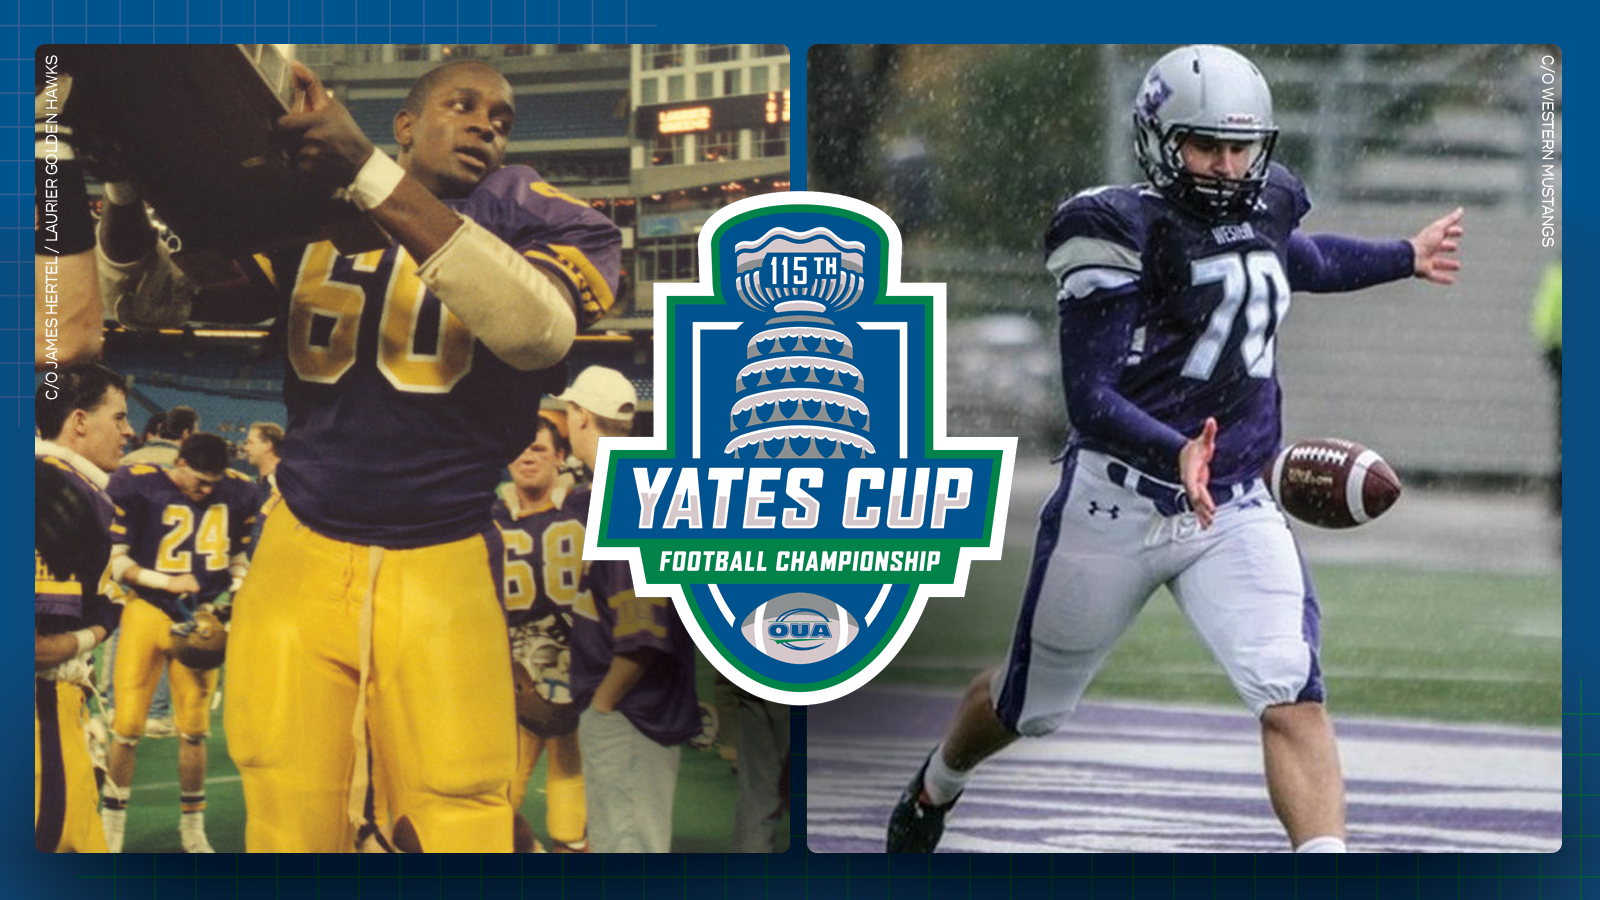 Graphic on predominantly blue background featuring action photos of Laurier football alum Hugh Lawson and Western football alum Lirim Hajrullahu on either side of the centered 115th Yates Cup logo